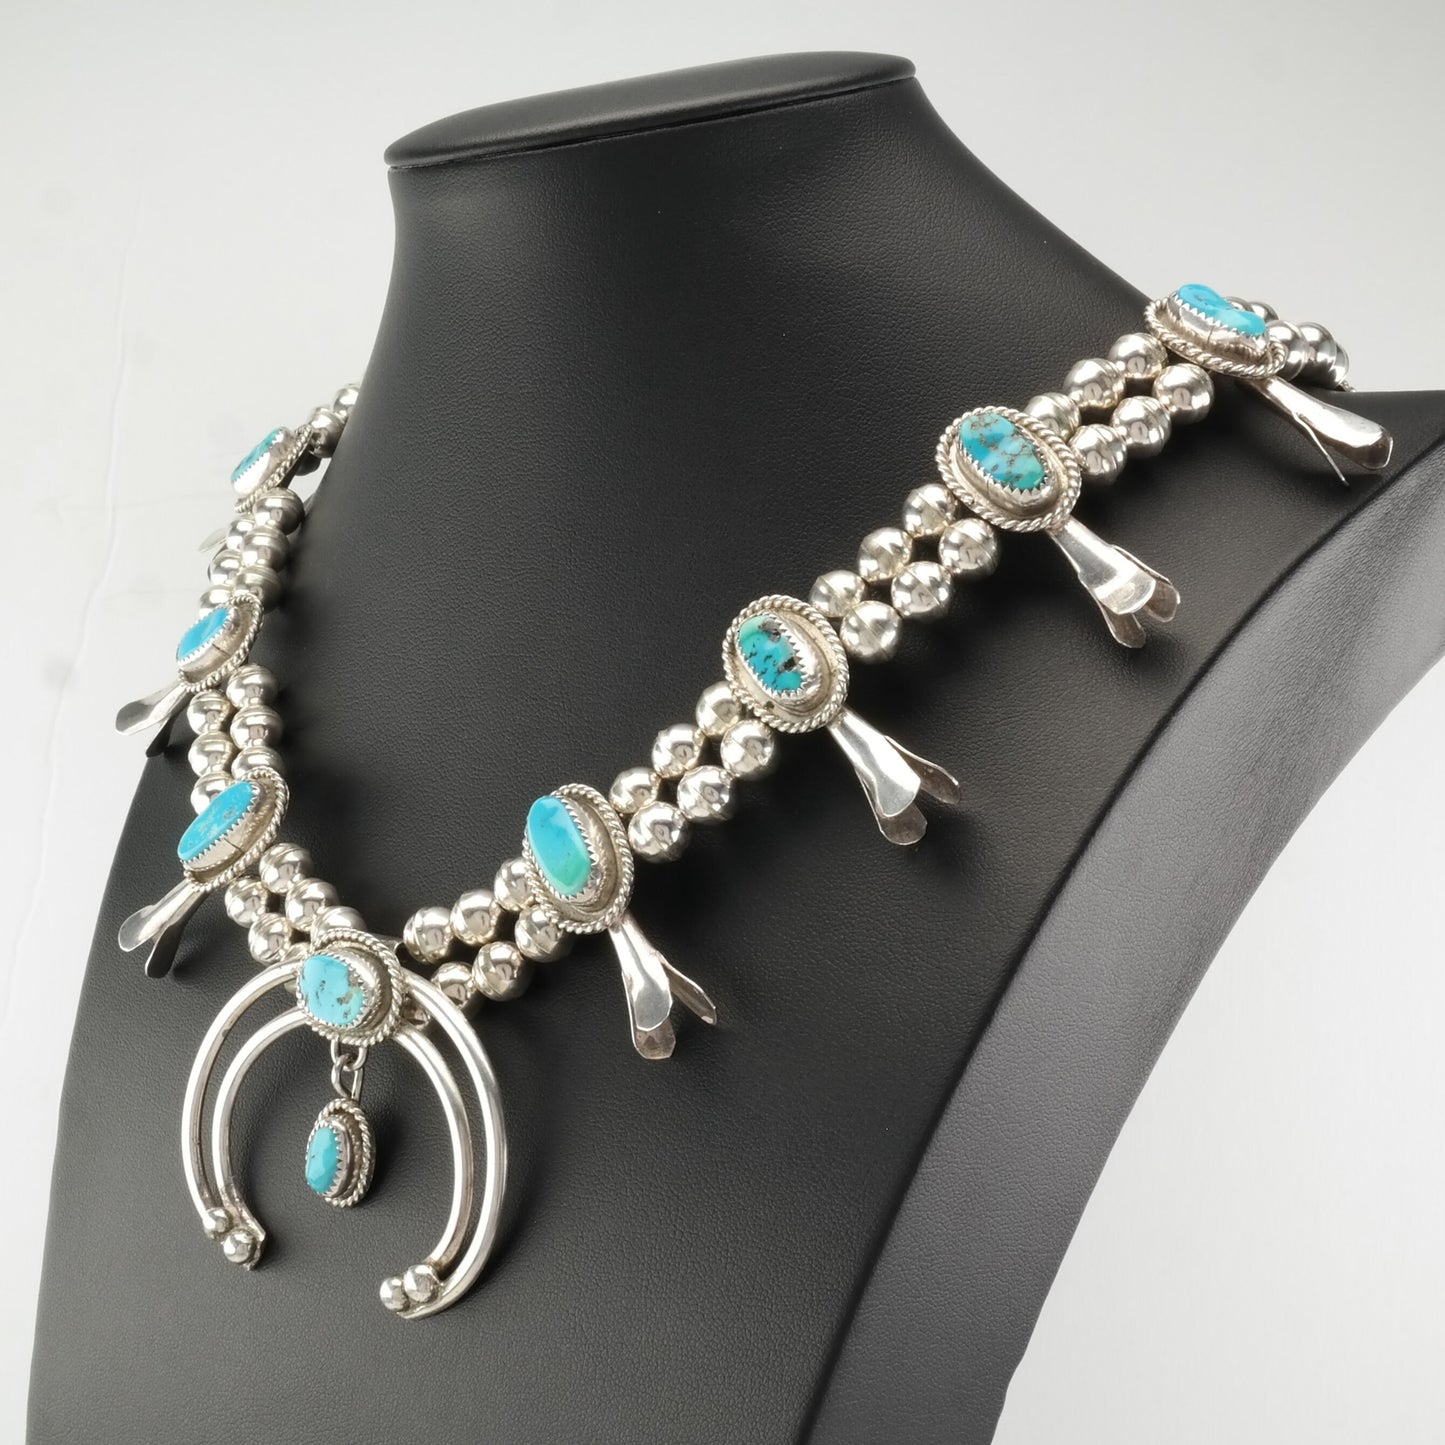 Vintage Native American Sterling Silver Blue Turquoise Sleeping Beauty Squash Blossom Necklace